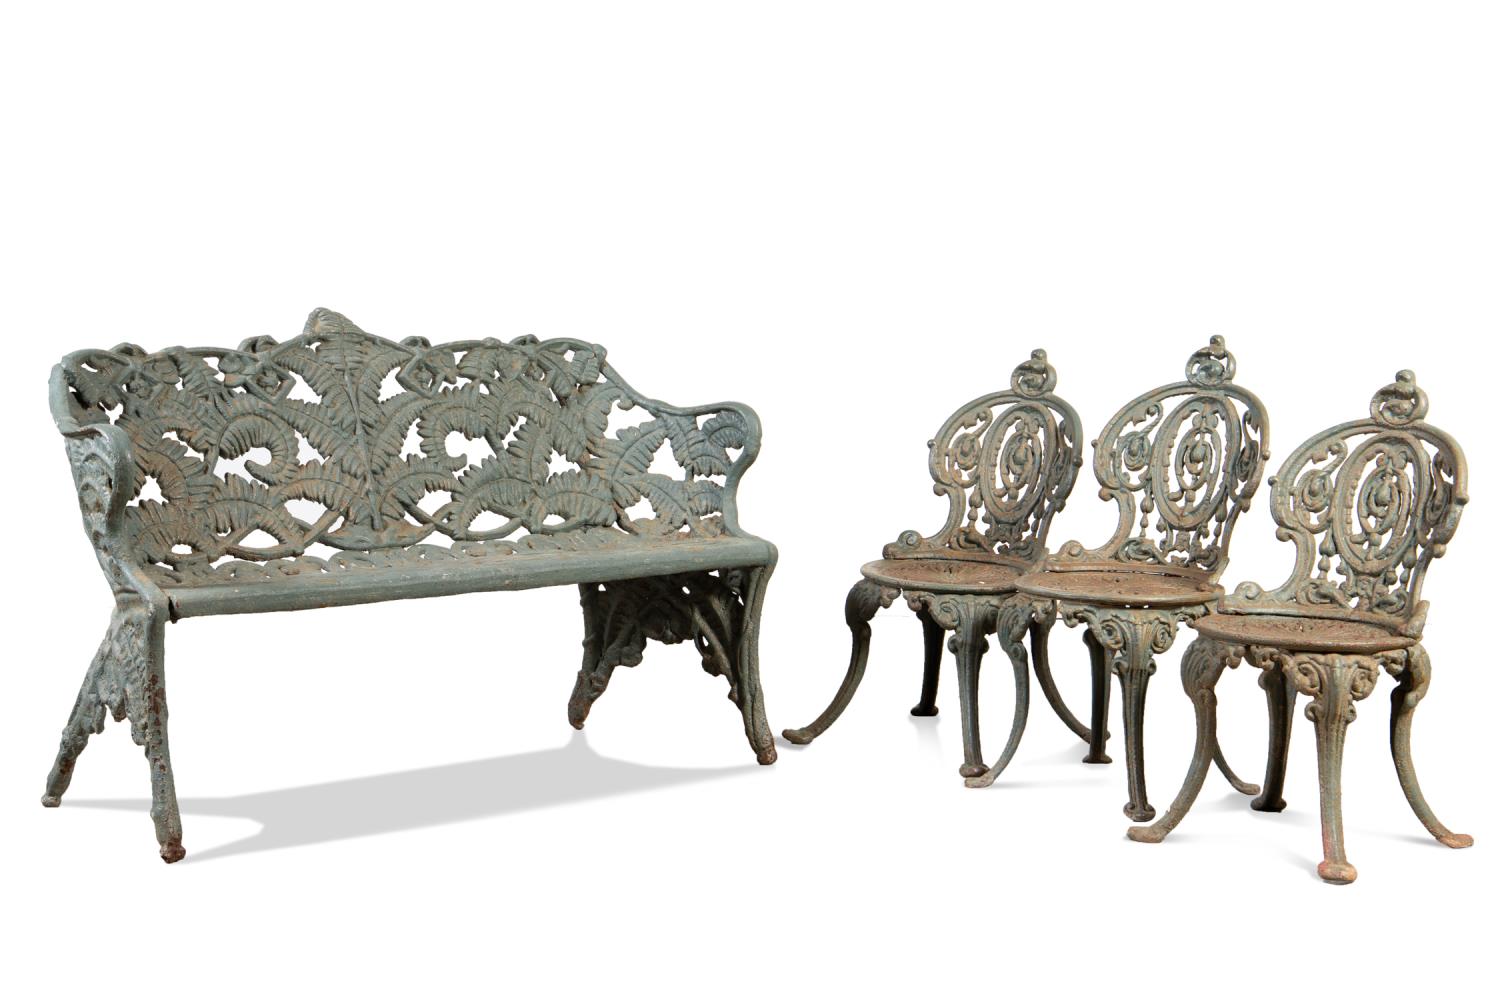 CAST IRON GARDEN GROUP, BENCH AND THREE